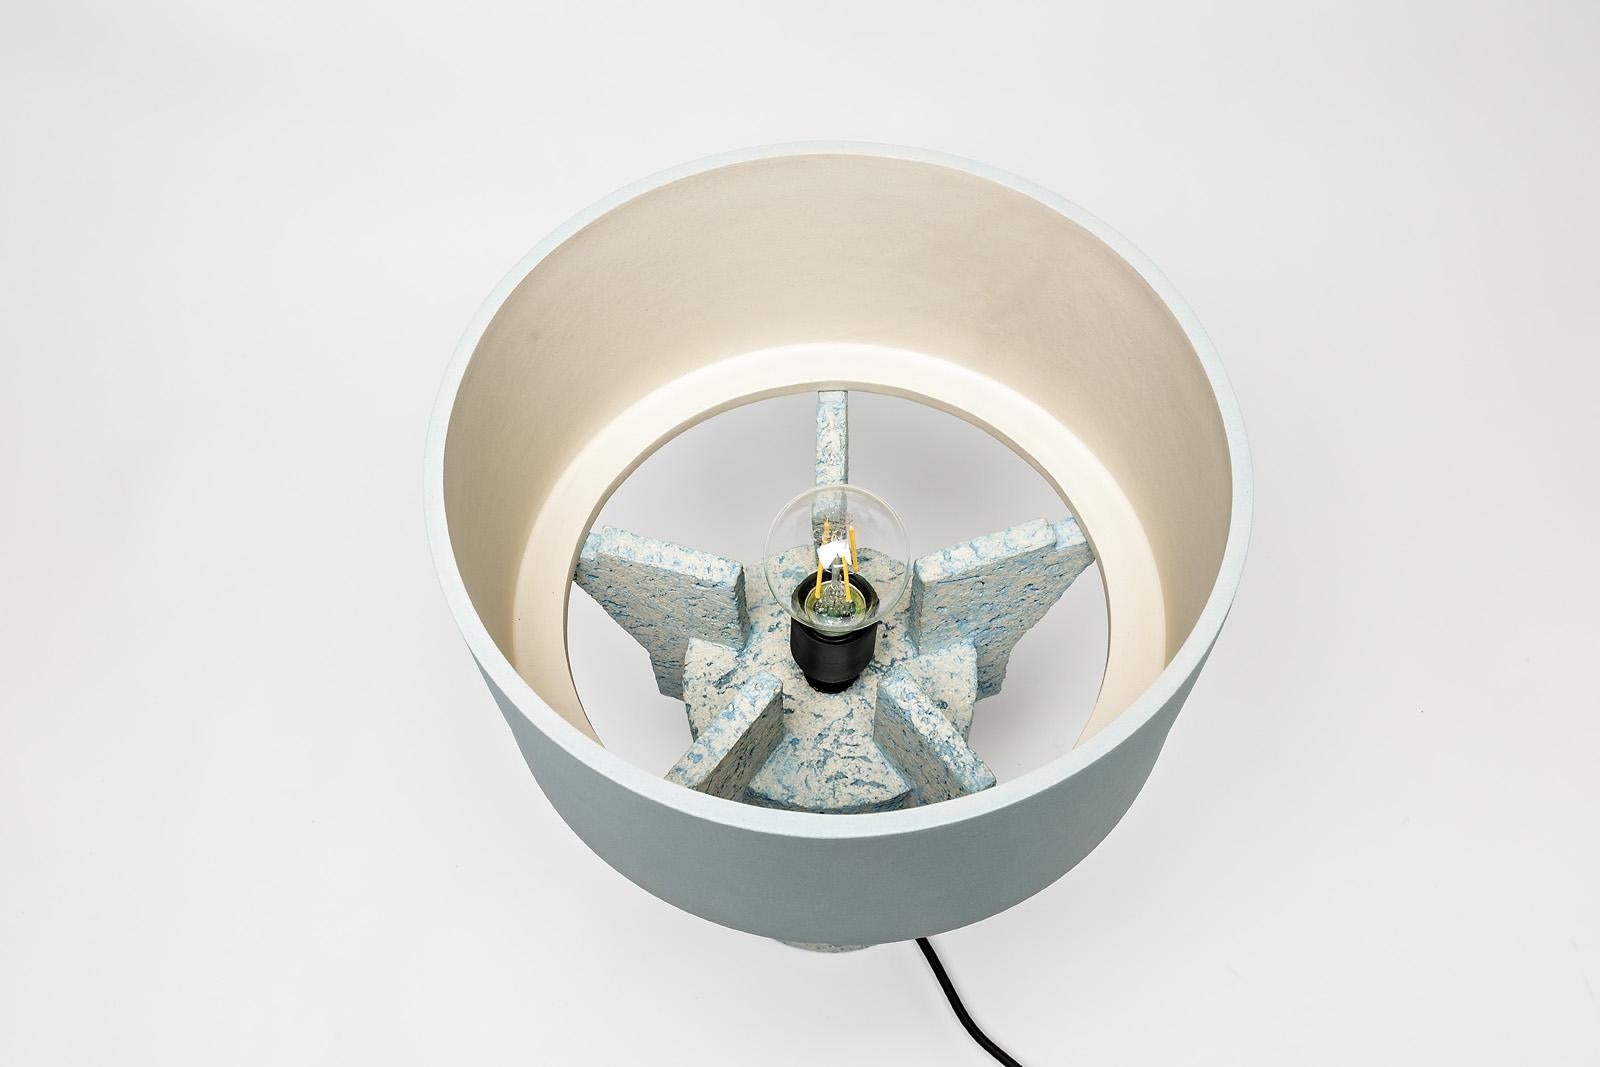 French Ceramic Table Lamp by Denis Castaing with Blue Glaze Decoration, 2019 For Sale